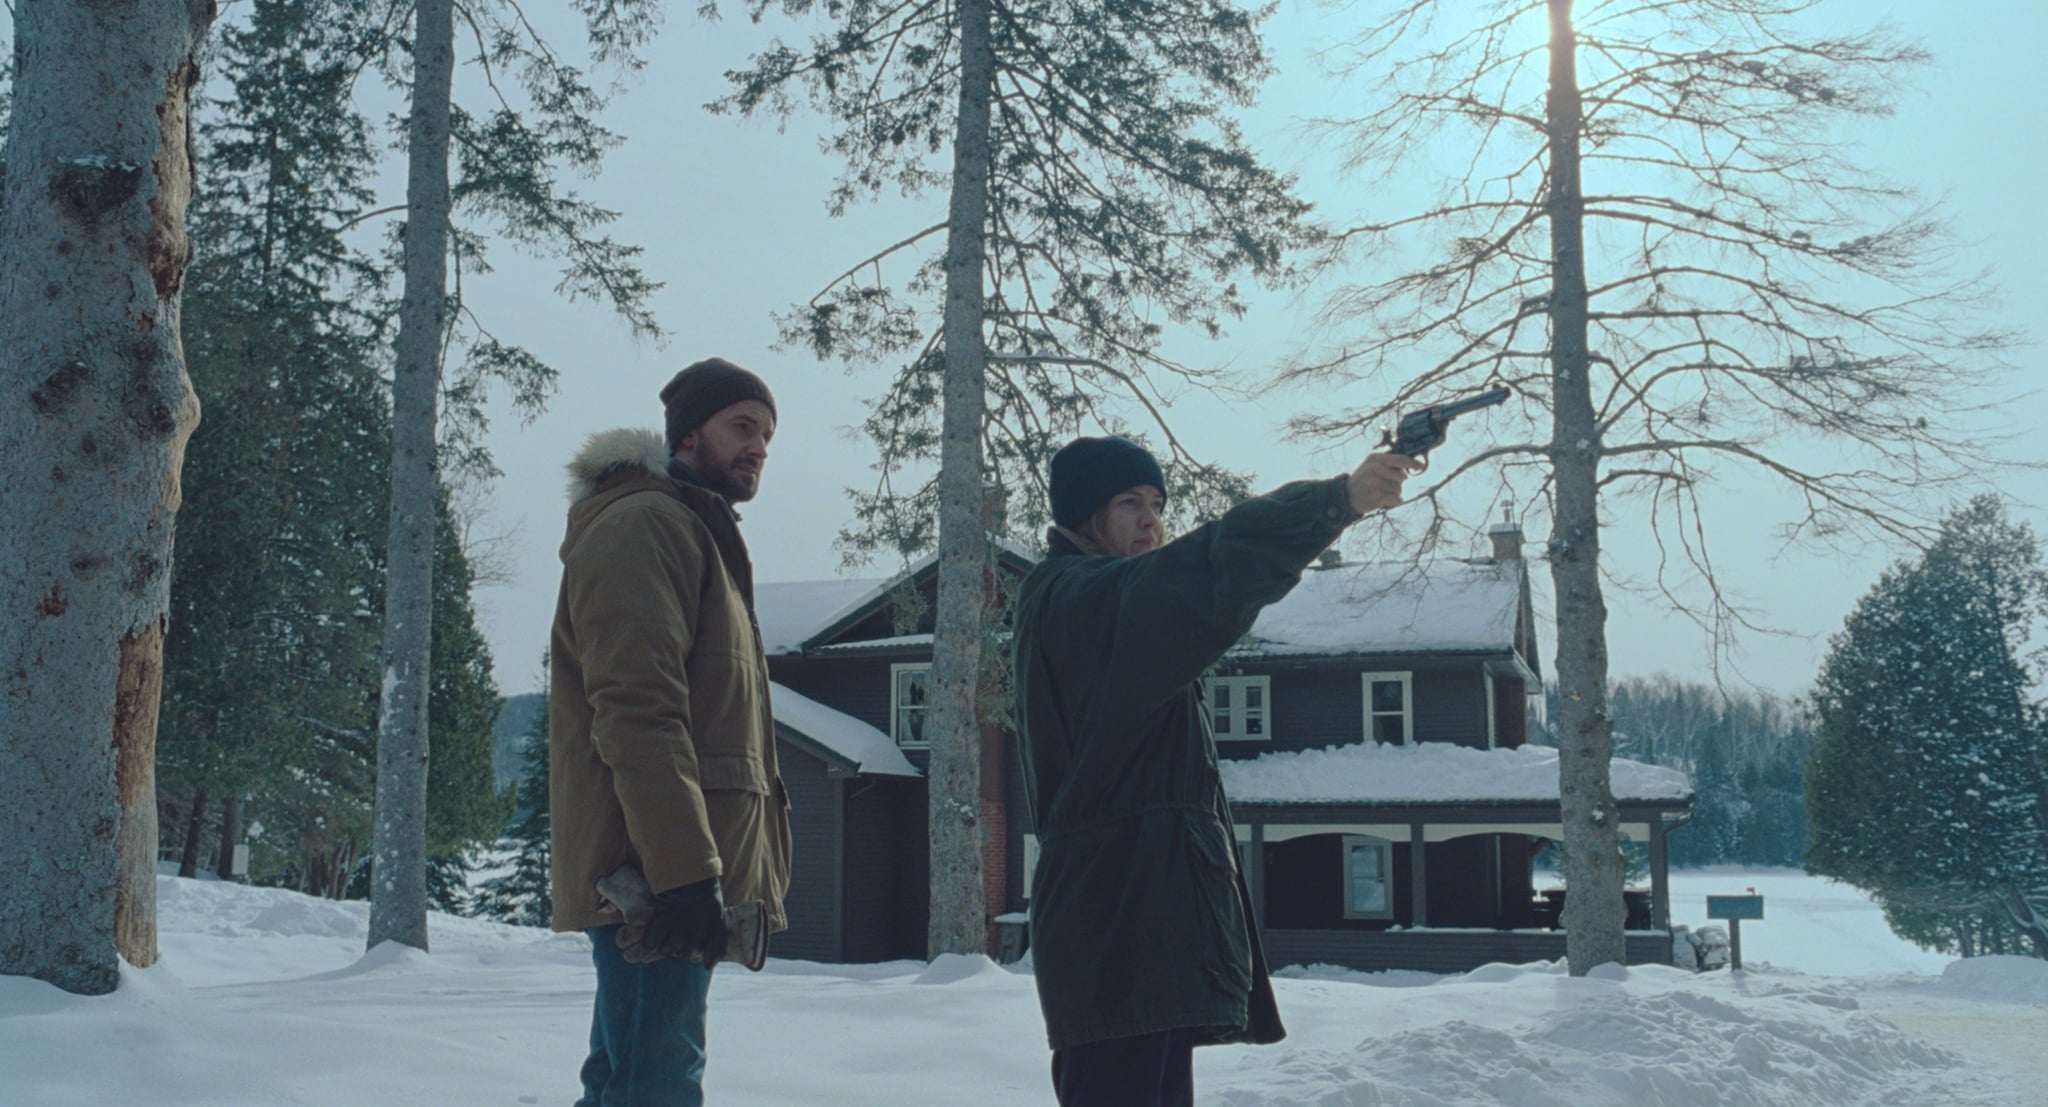 THE LODGE, from left: Richard Armitage, Riley Keough, 2019.  Neon / courtesy Everett Collection